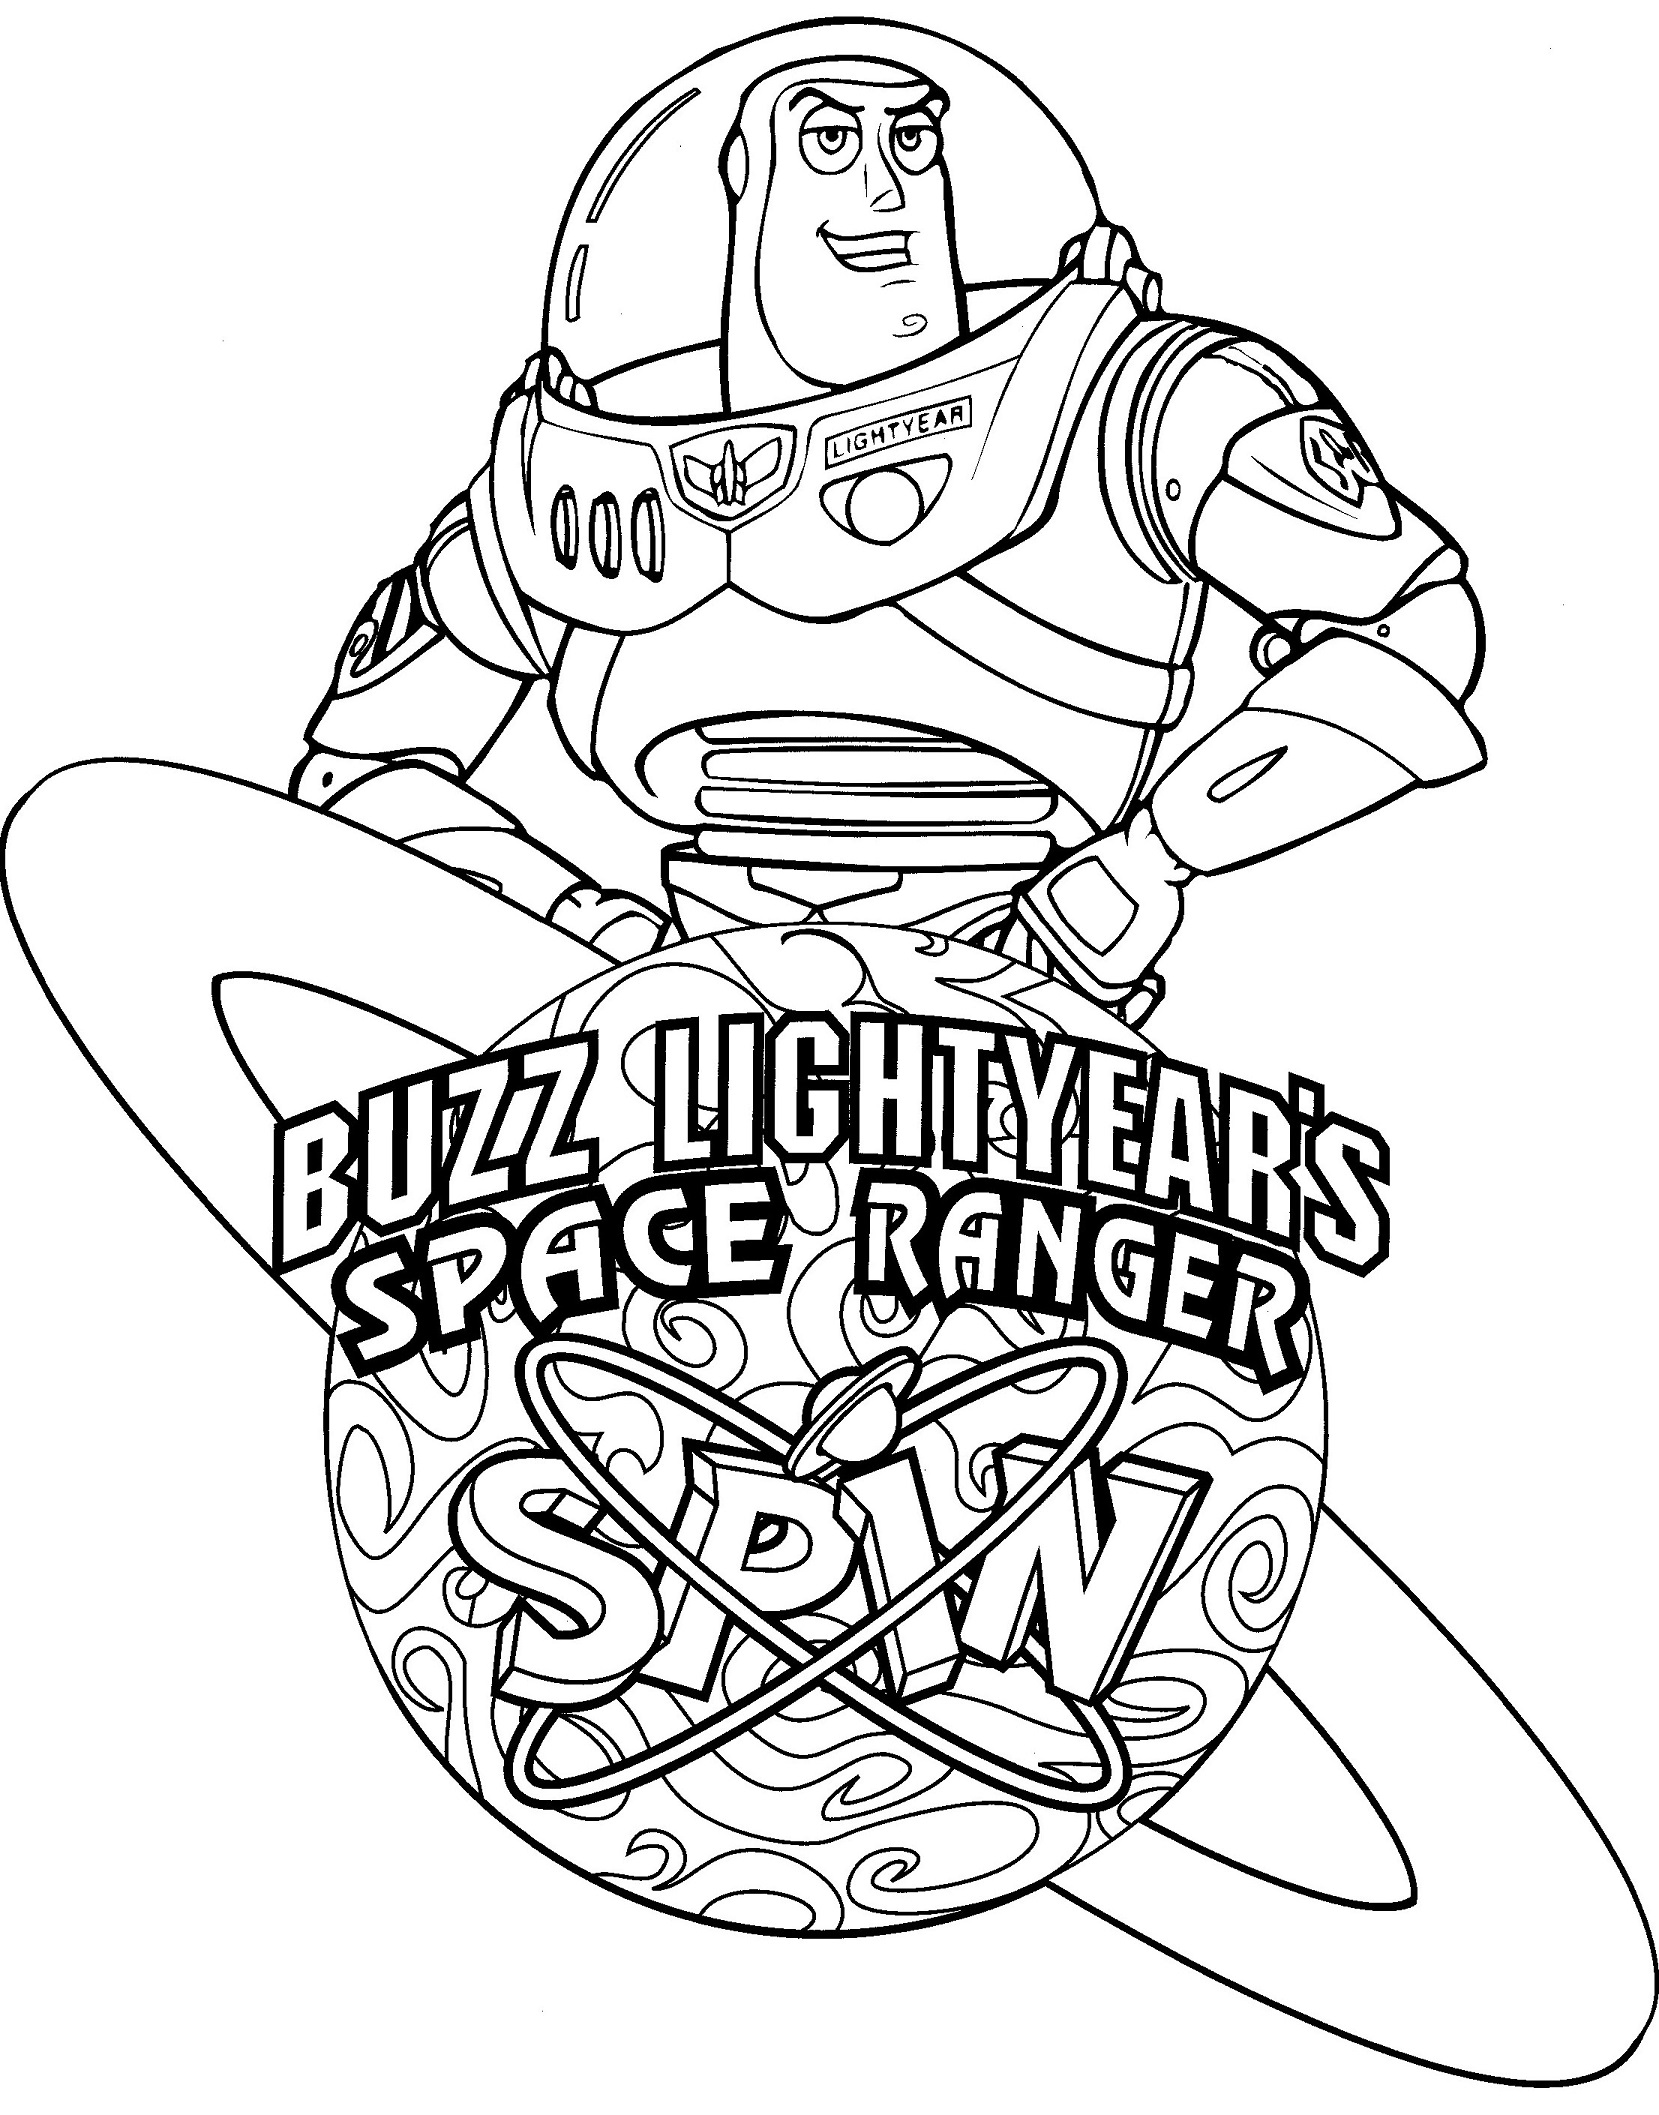 Disney coloring pages â buzz lightyear space ranger spin â the disney nerds podcast